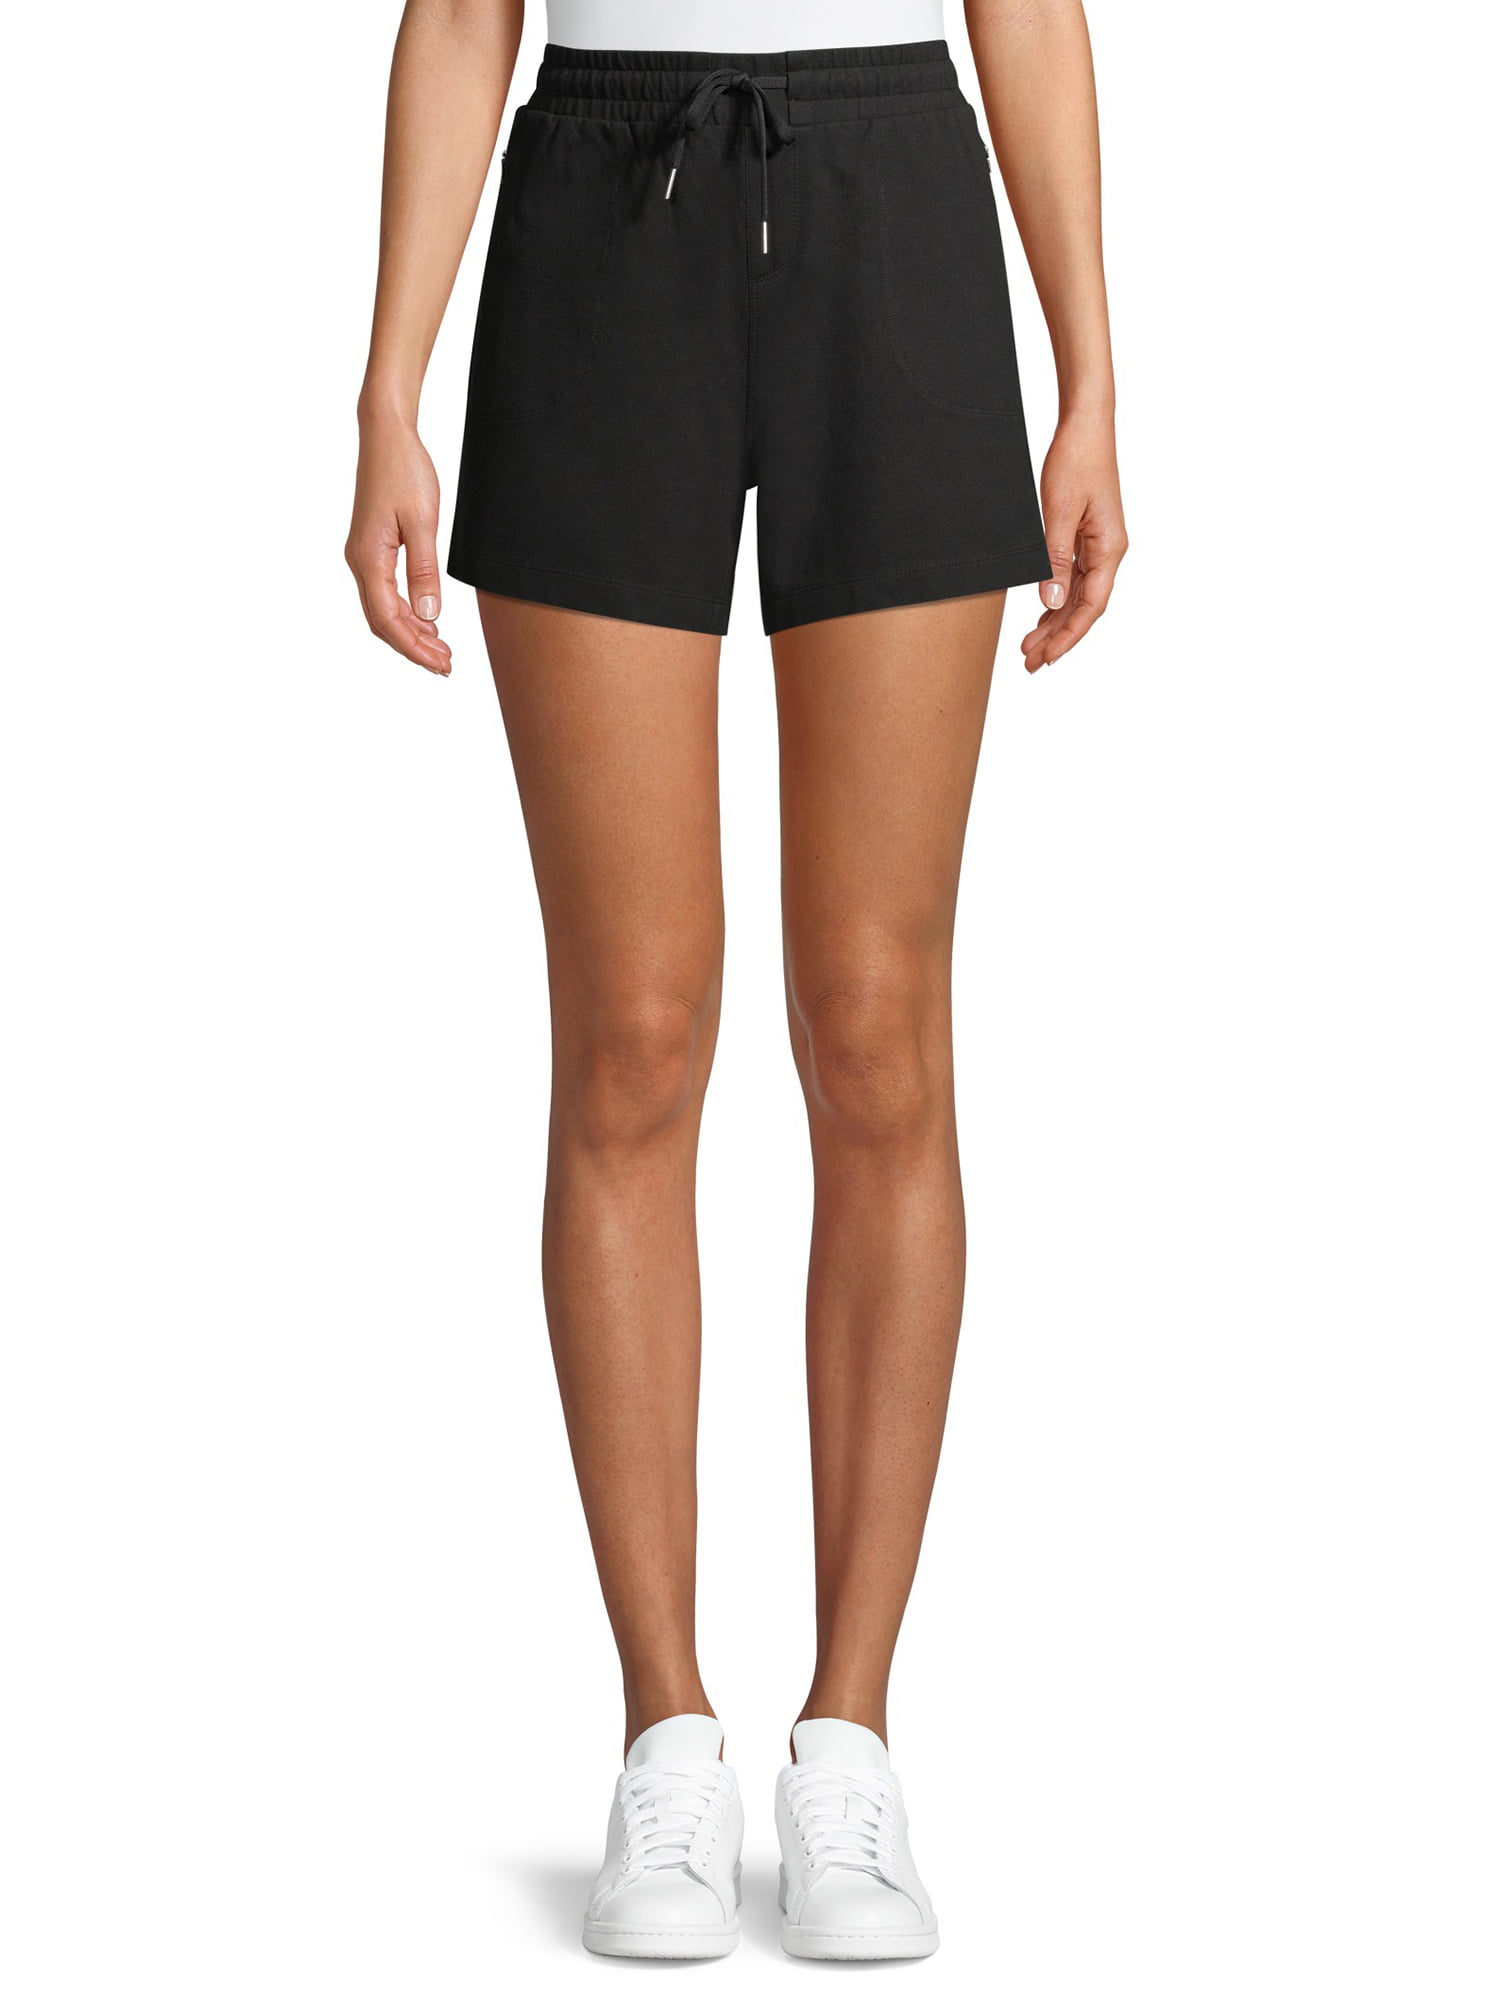 Athletic Works - Athletic Works Women's Athleisure Commuter Shorts ...